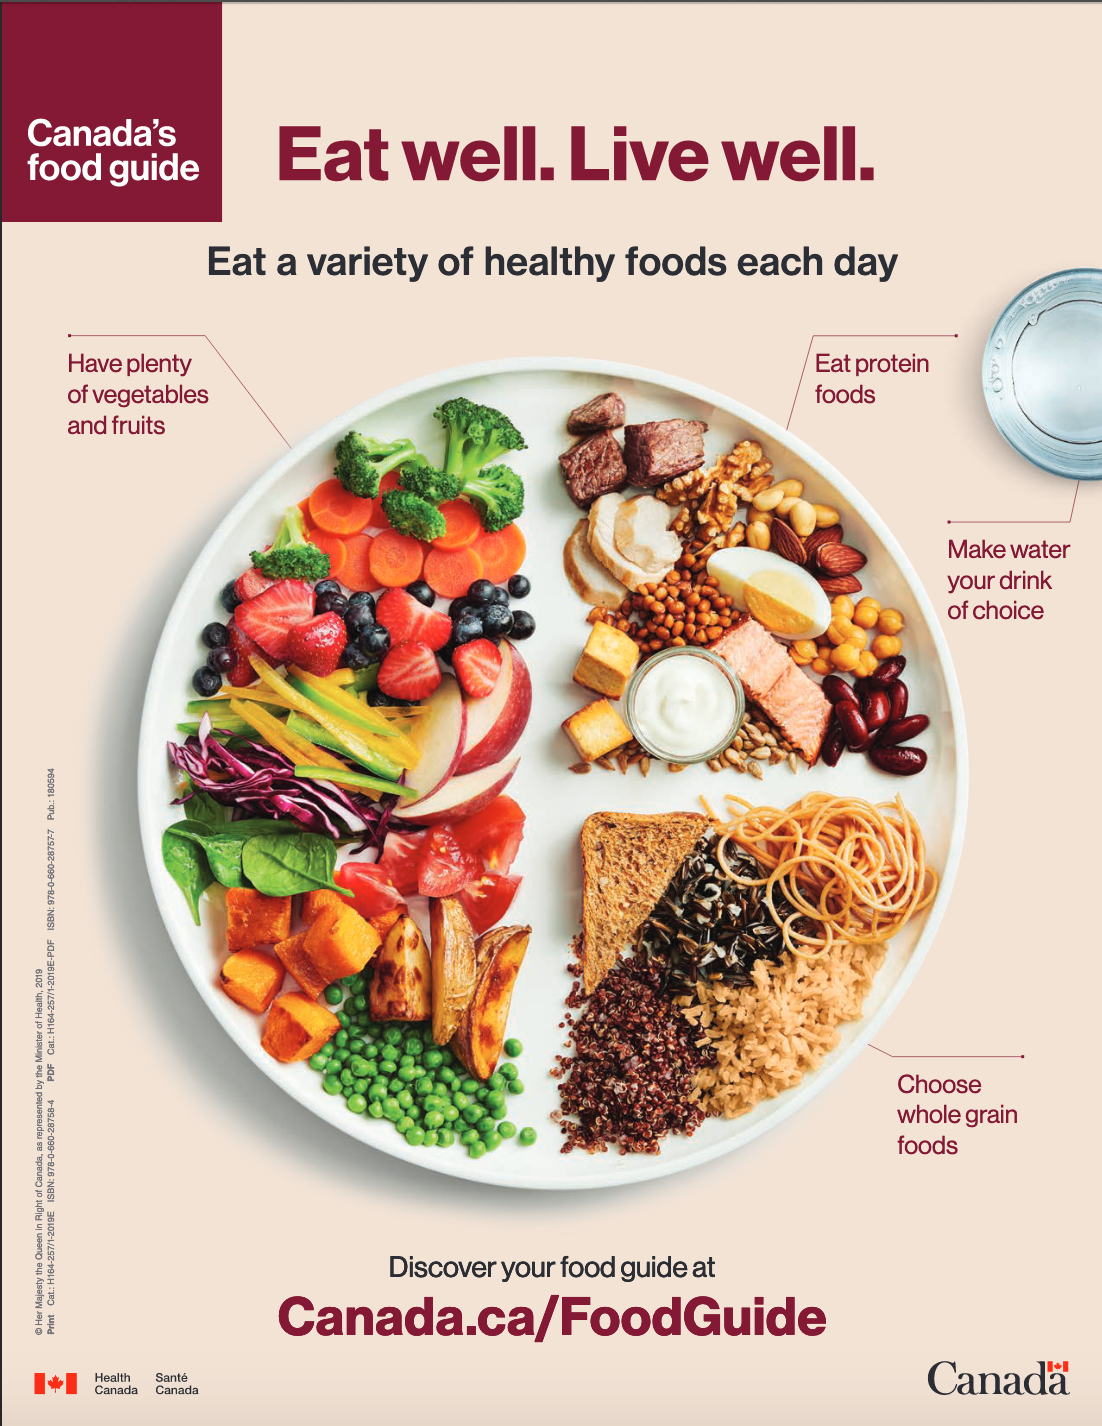 Canada's 2019 Food Guide Front Page, showing a plate of food that meets Food Guide recommendations